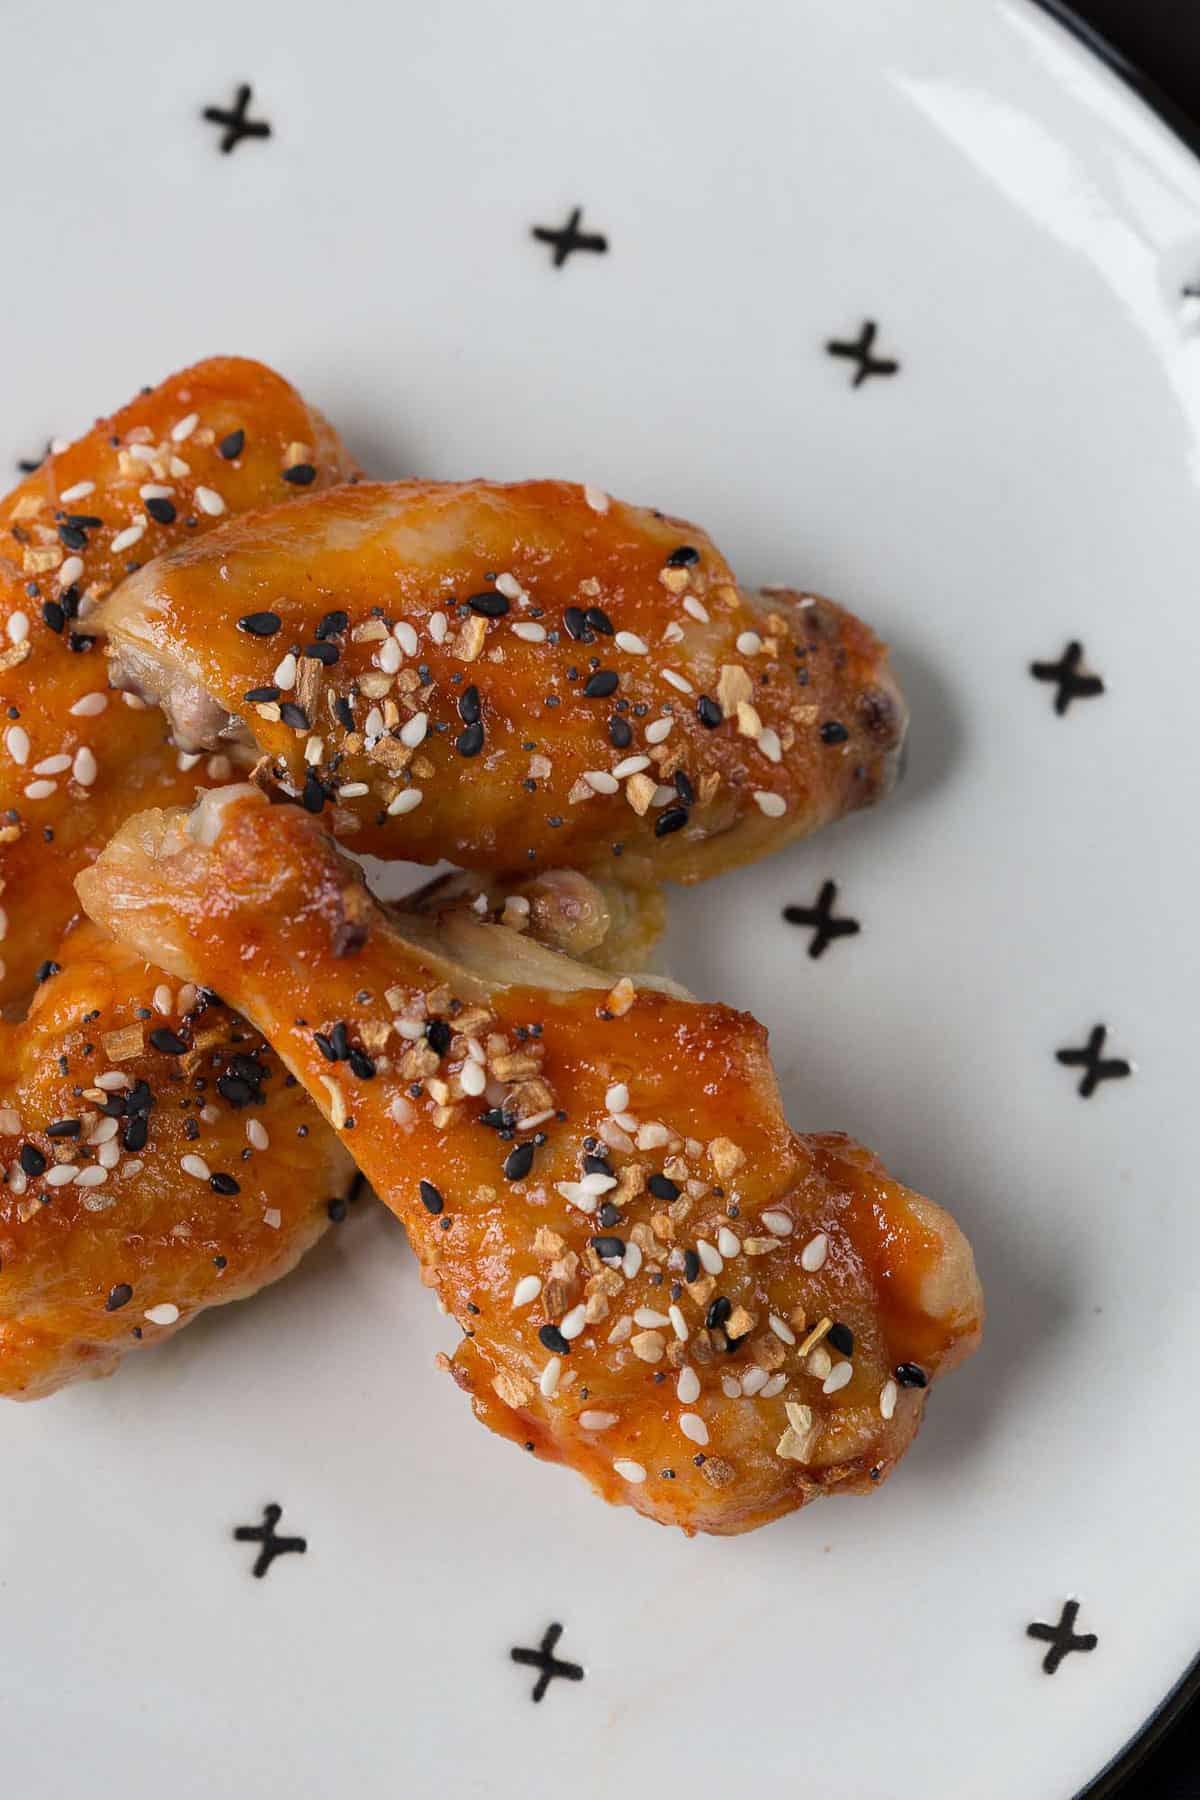 Will putting Twix seasoning on chicken wings be the next big food hack?